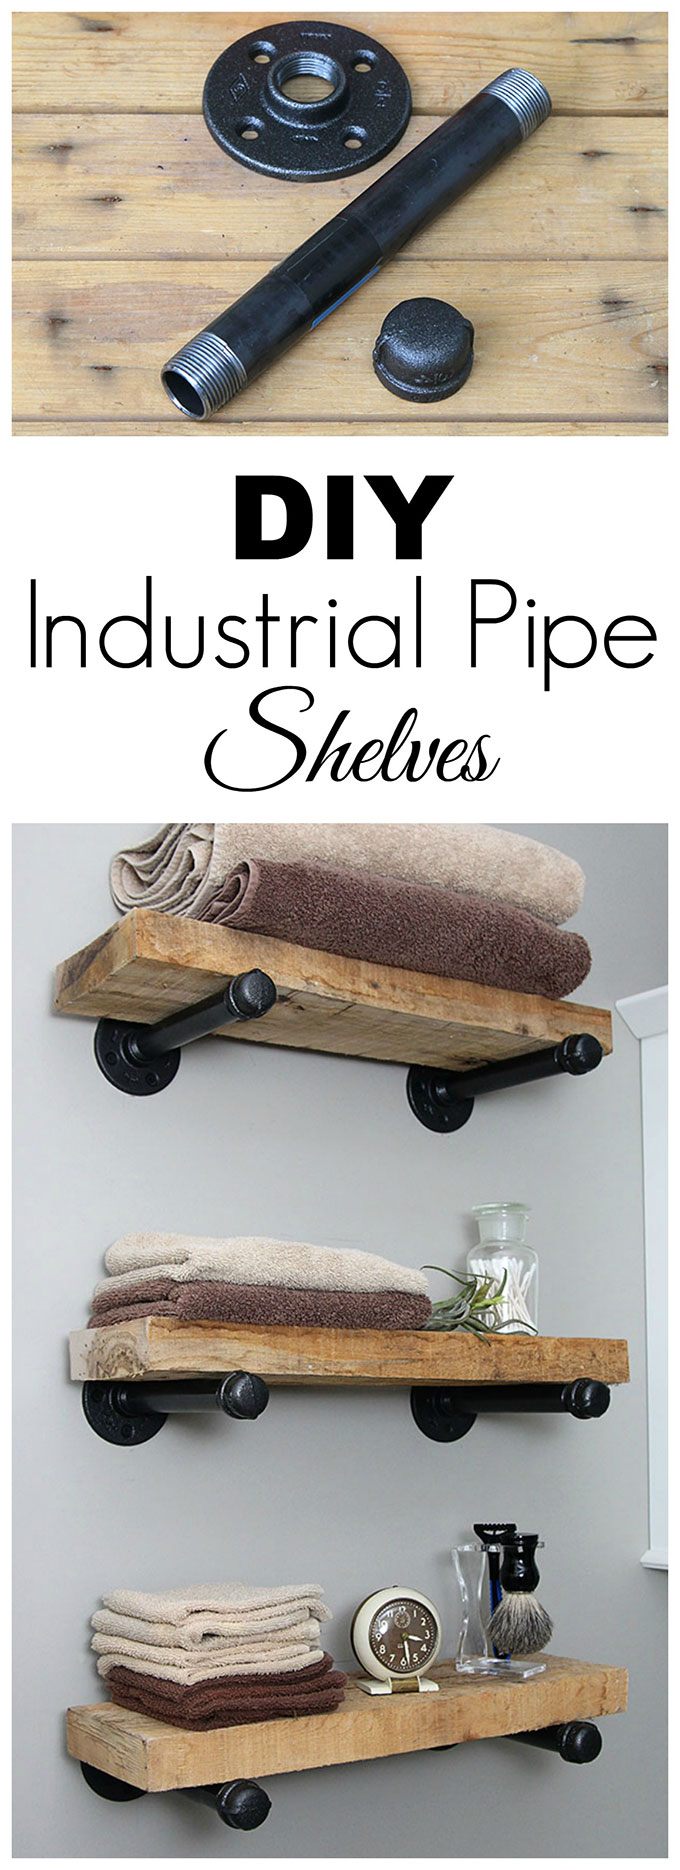 Pinterest graphic for DIY industrial pipe shelves